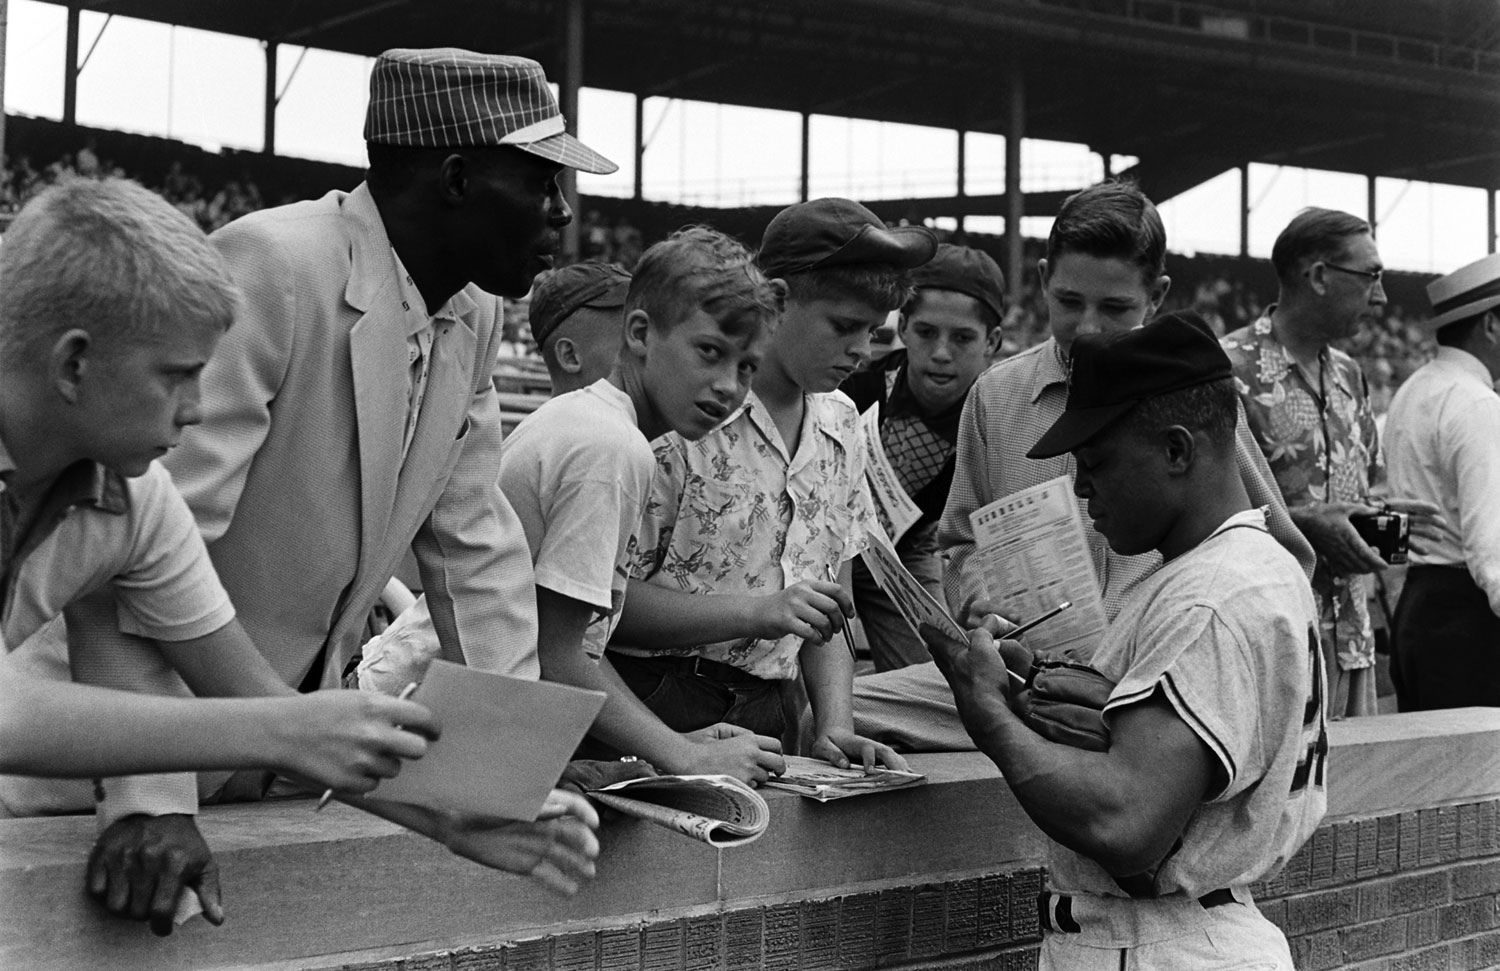 Willie Mays signs autographs for fans, 1954.